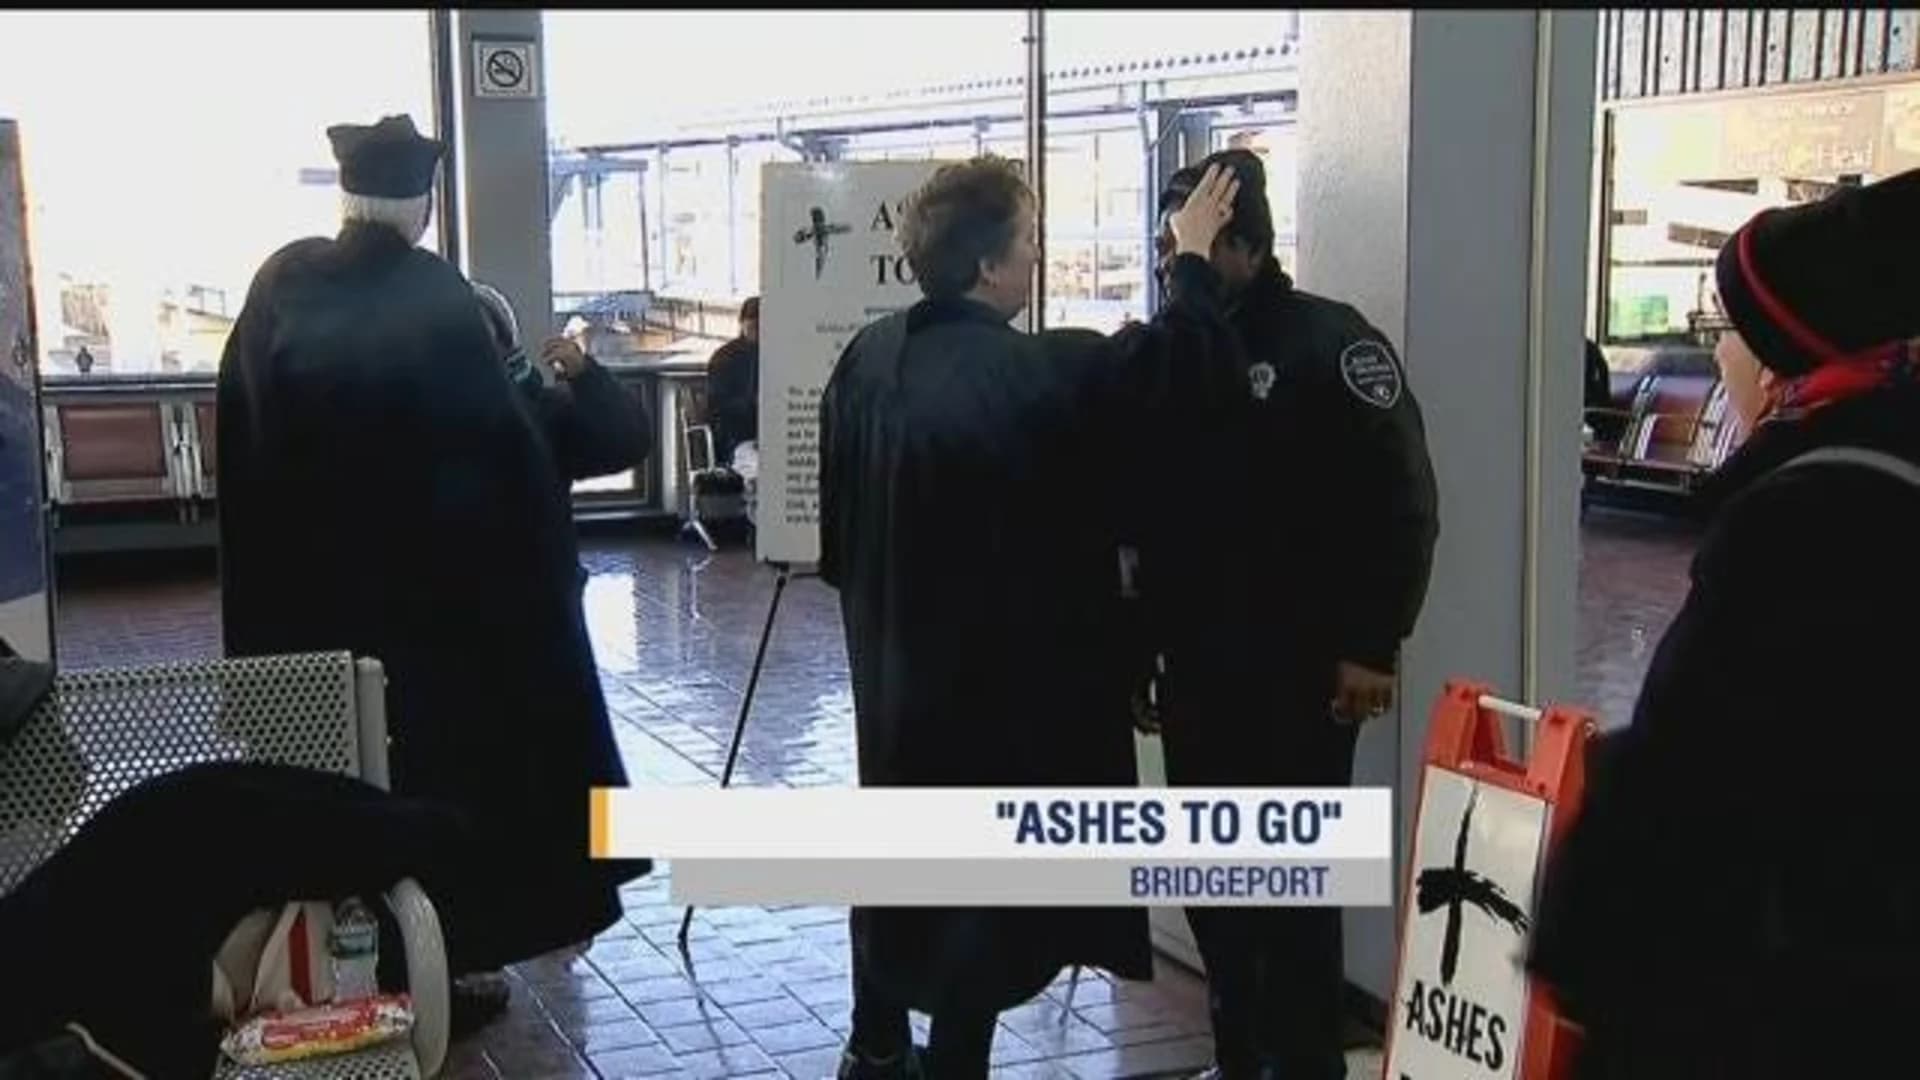 Clergy hand out ashes to commuters at Bridgeport train station